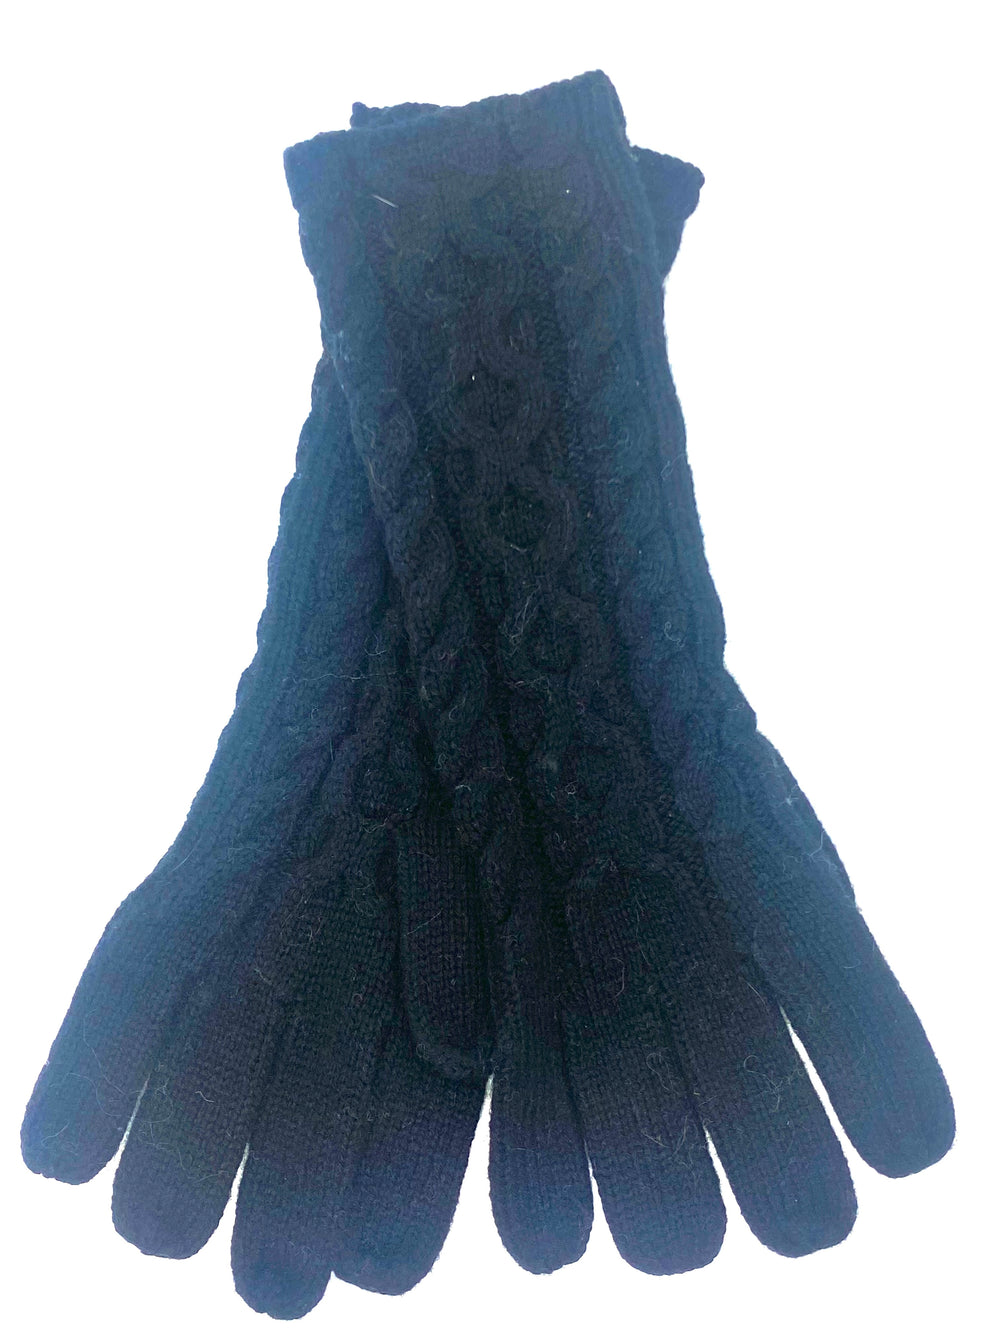 Lauer gloves, wool cable